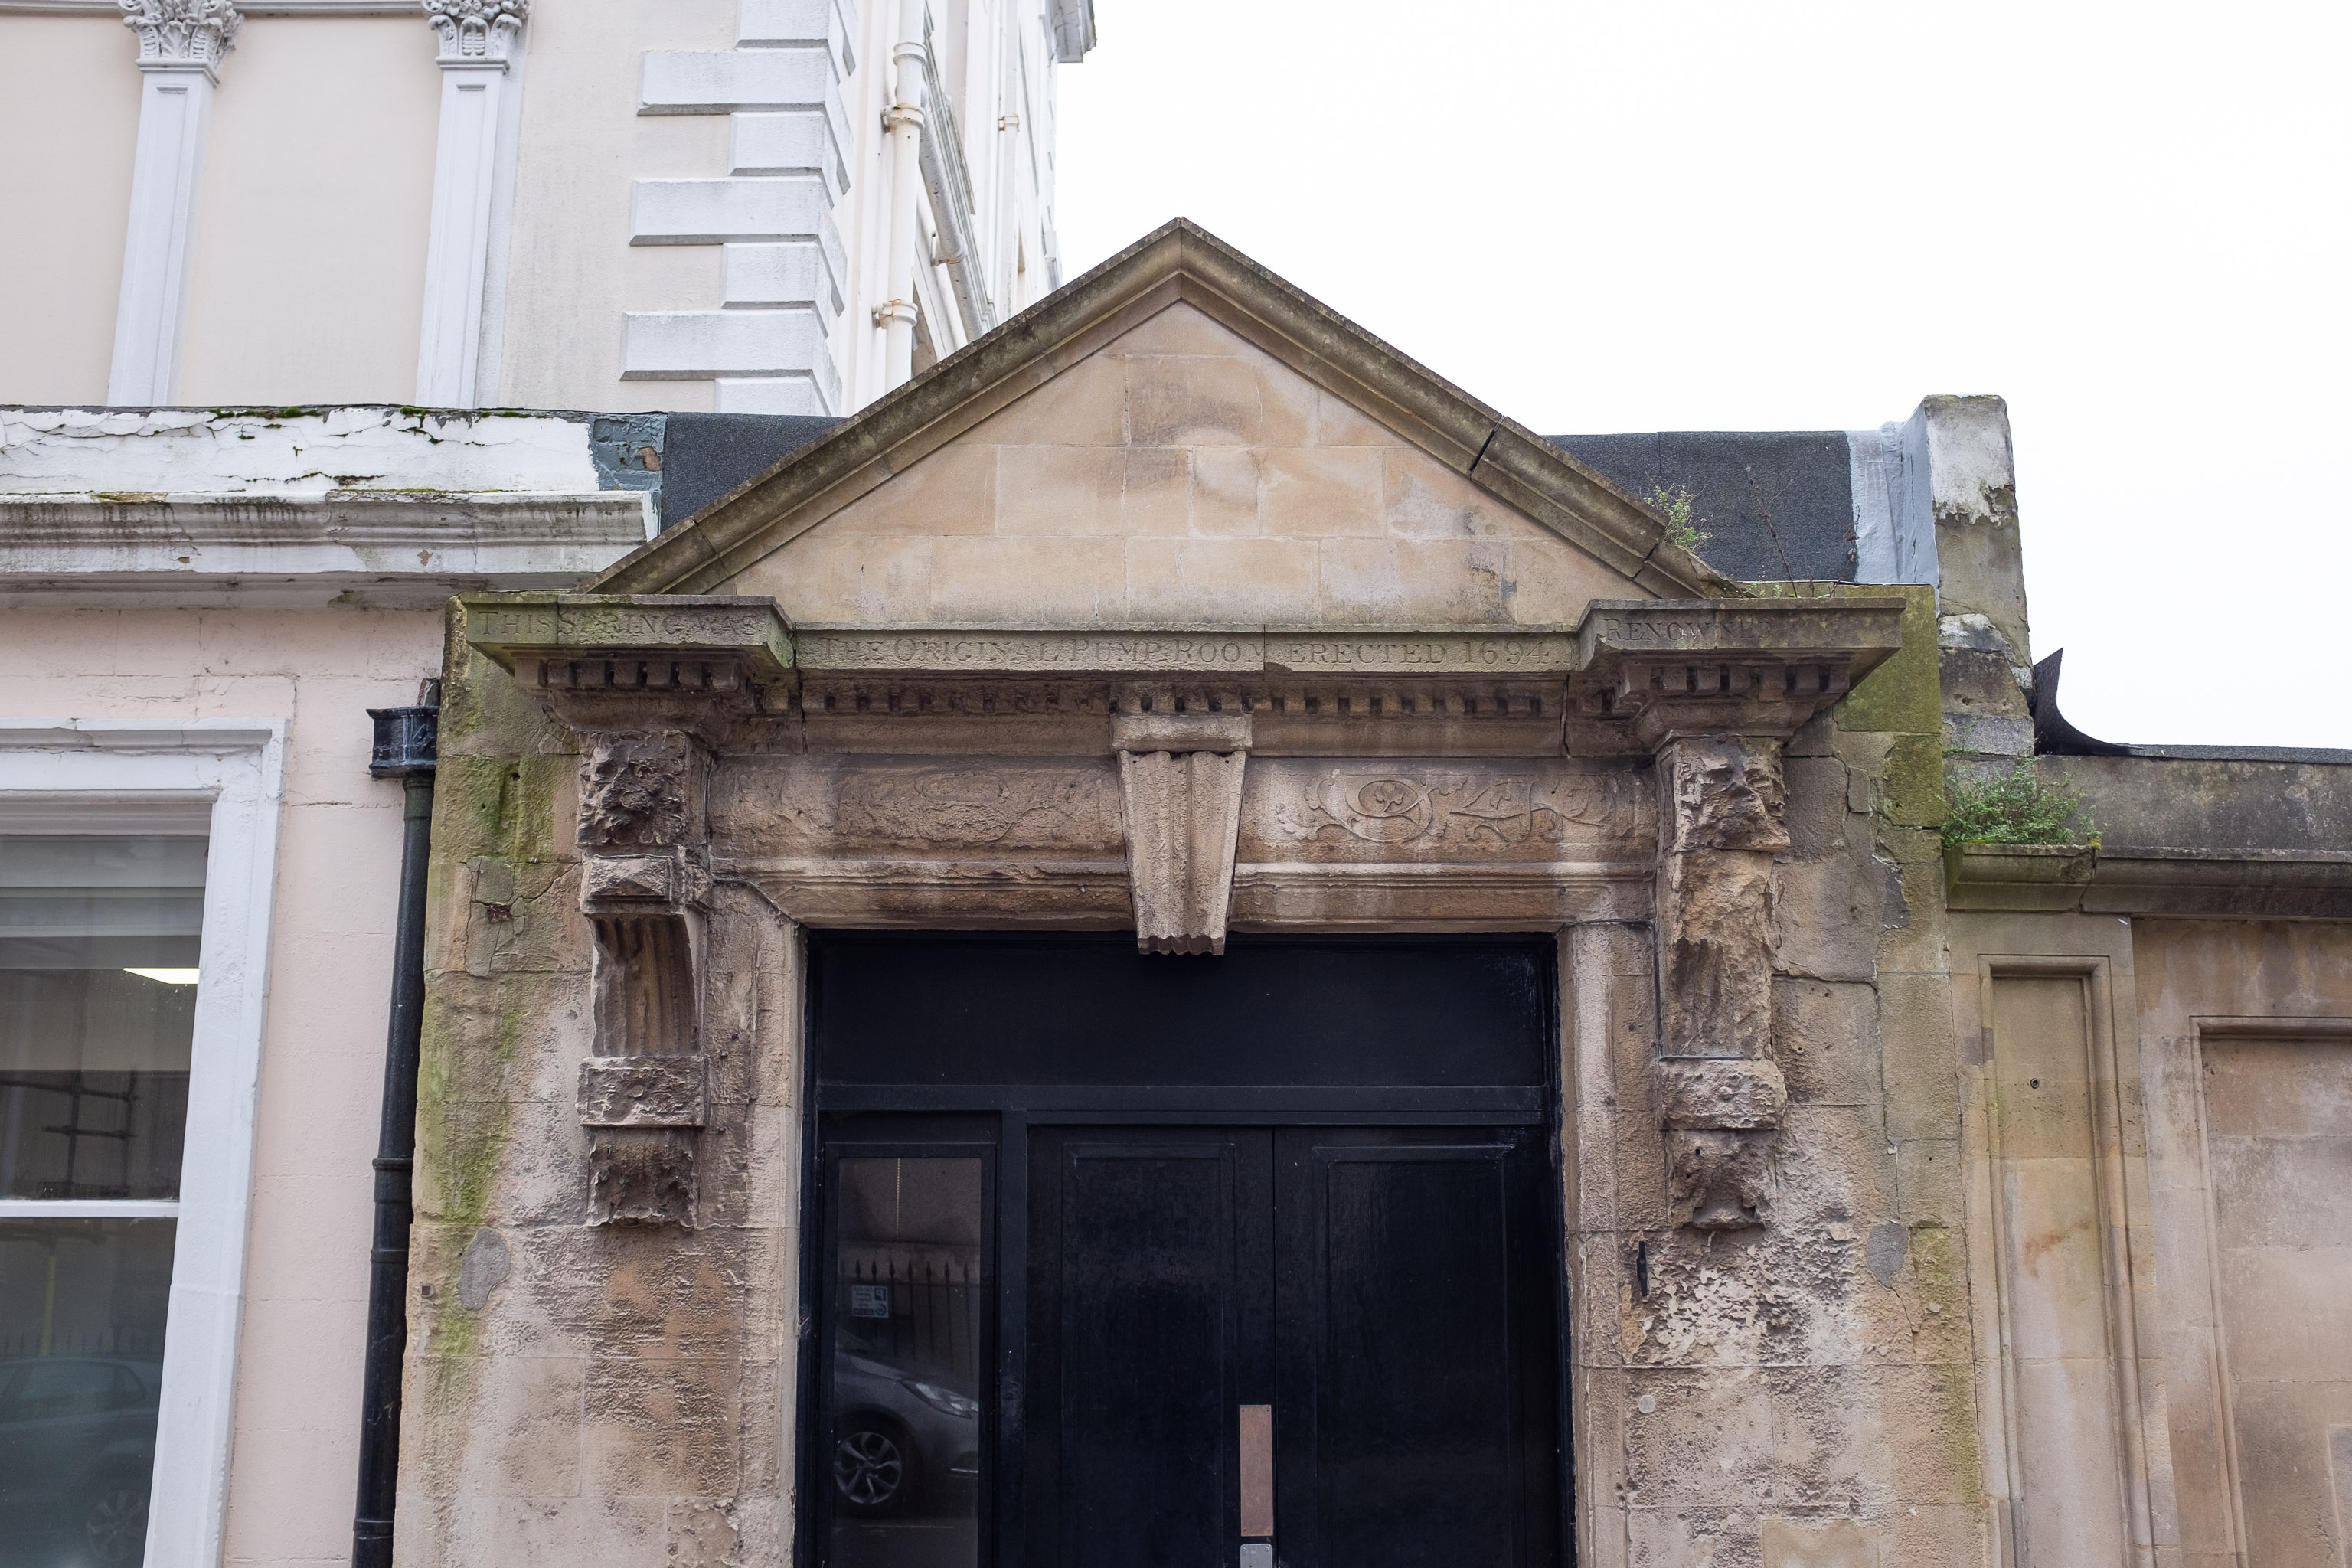 THIS SPRING WAS THE ORIGINAL PUMP ROOM ERECTED 1694 RENOWNED
This building is 1894, but commemorates the original Hot Well House down in actual Hotwells, built in 1694.
